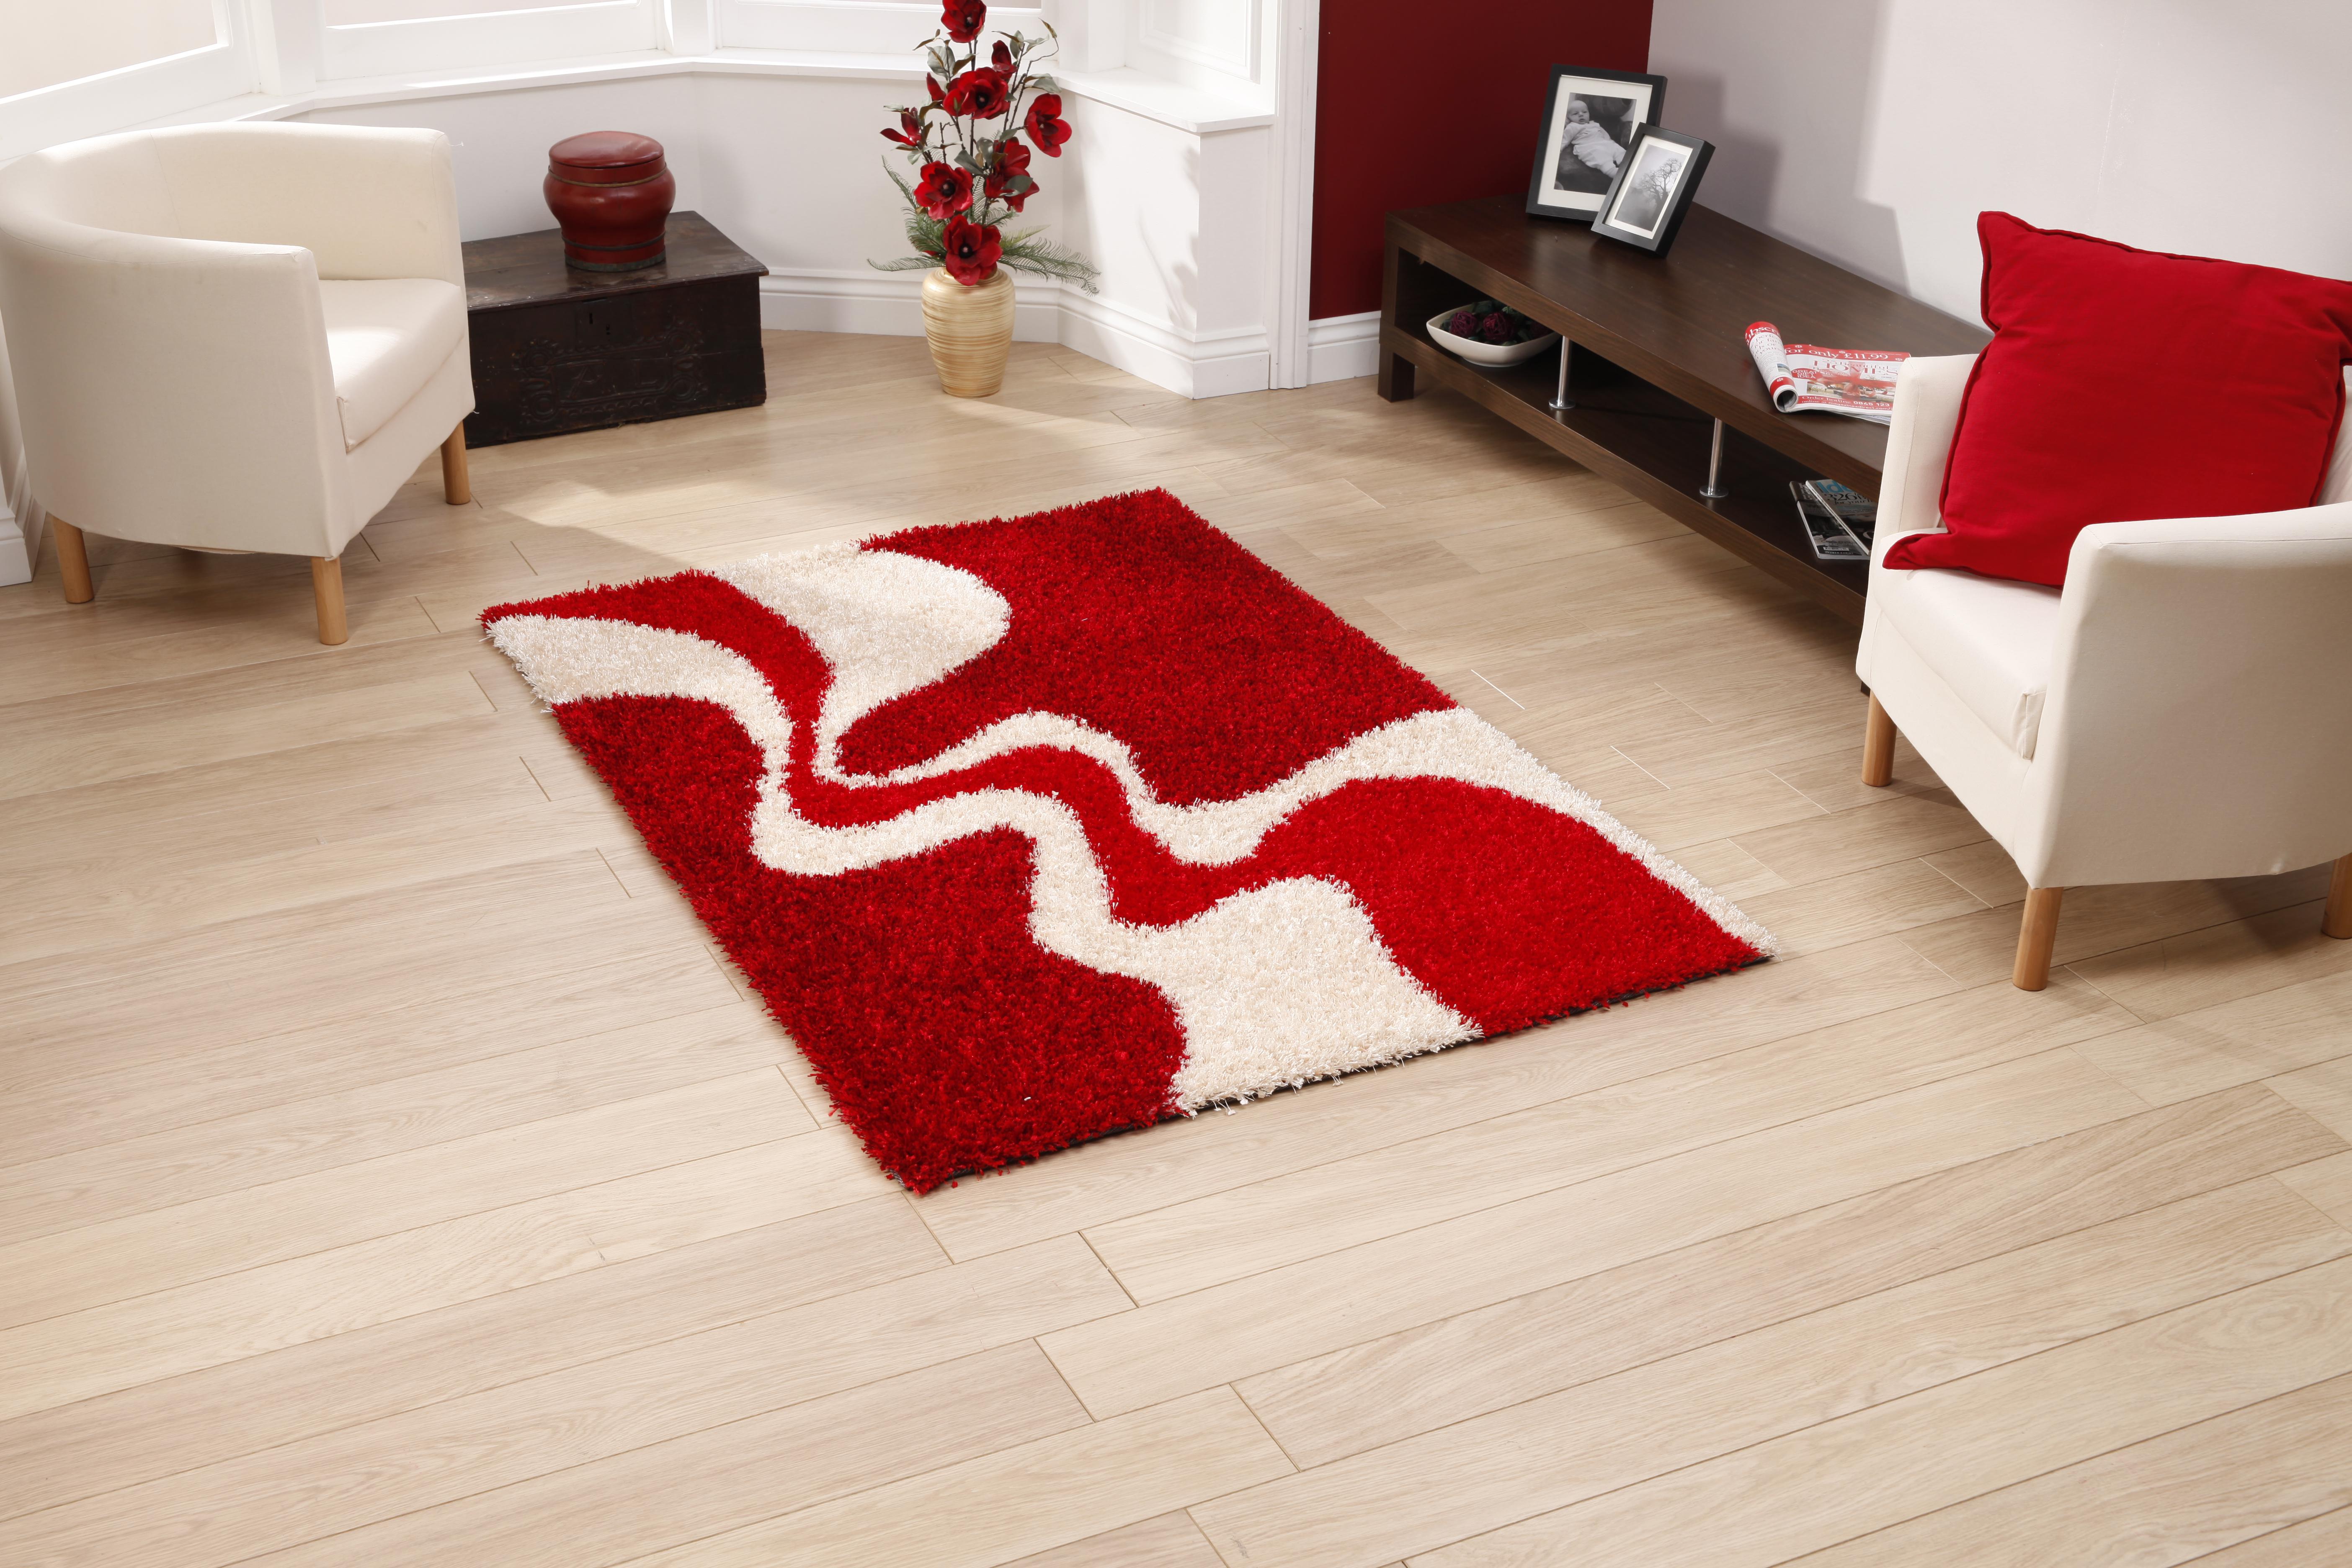 carpet designs for home modern carpets and rugs: red and white design TXCCIQH